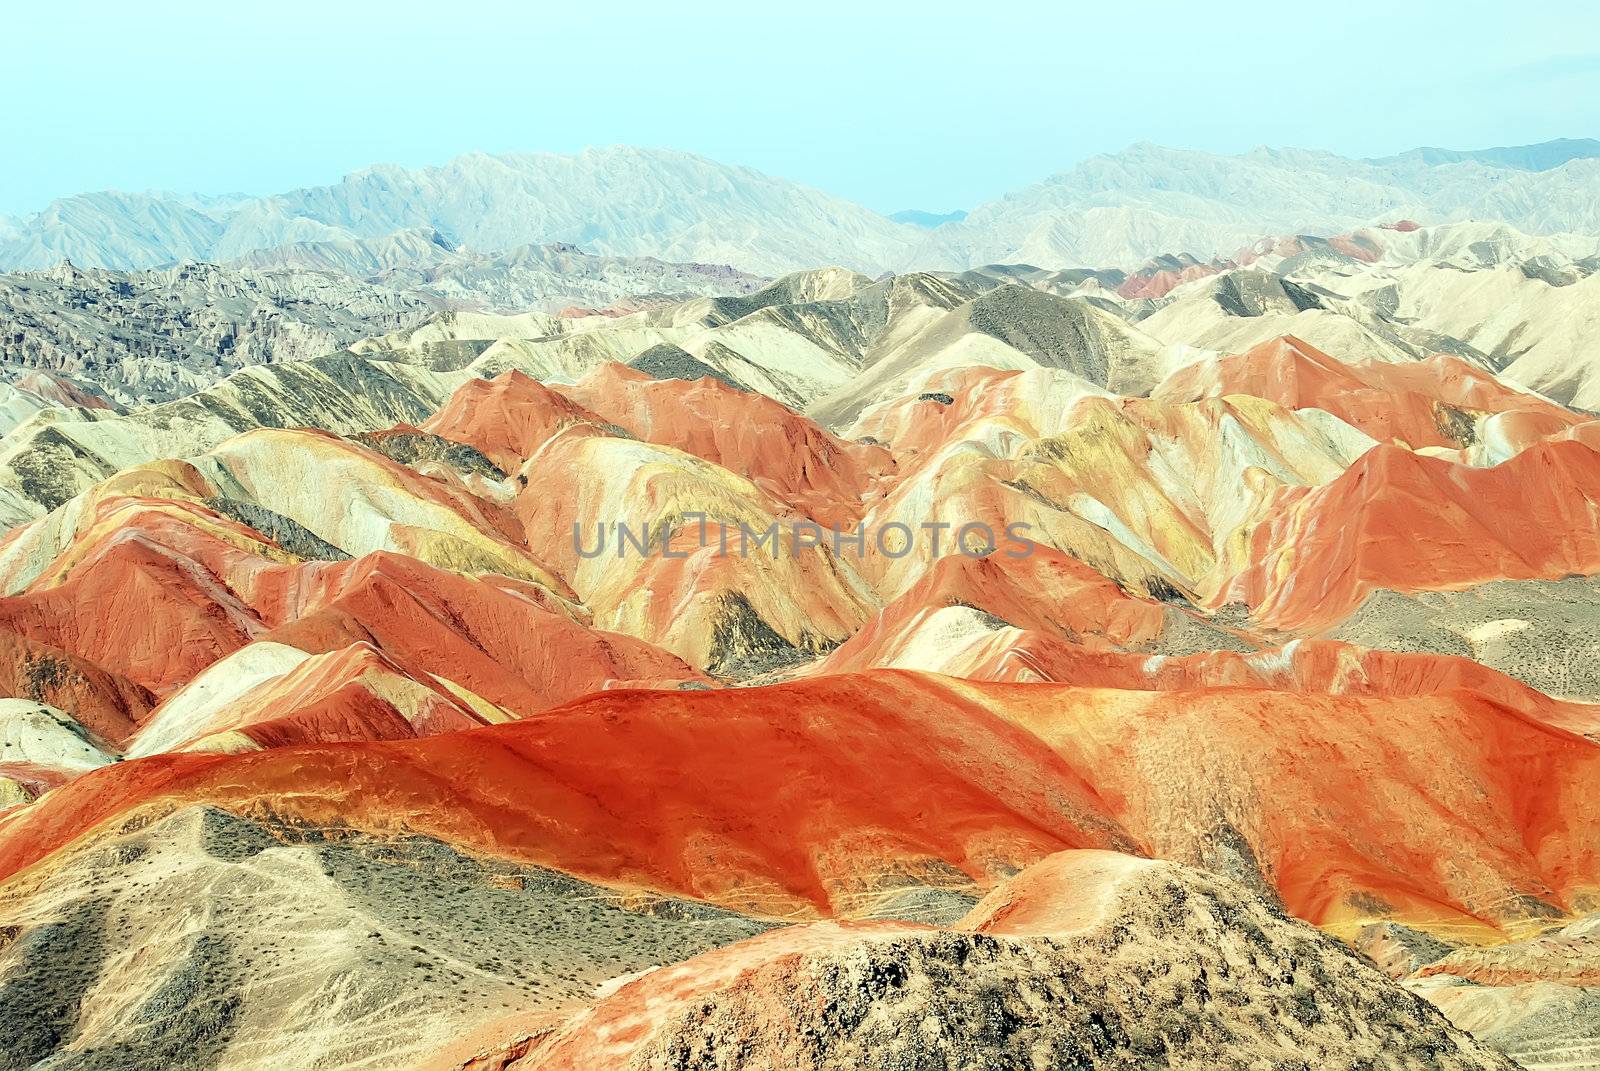 wind erosion landforms by xfdly5